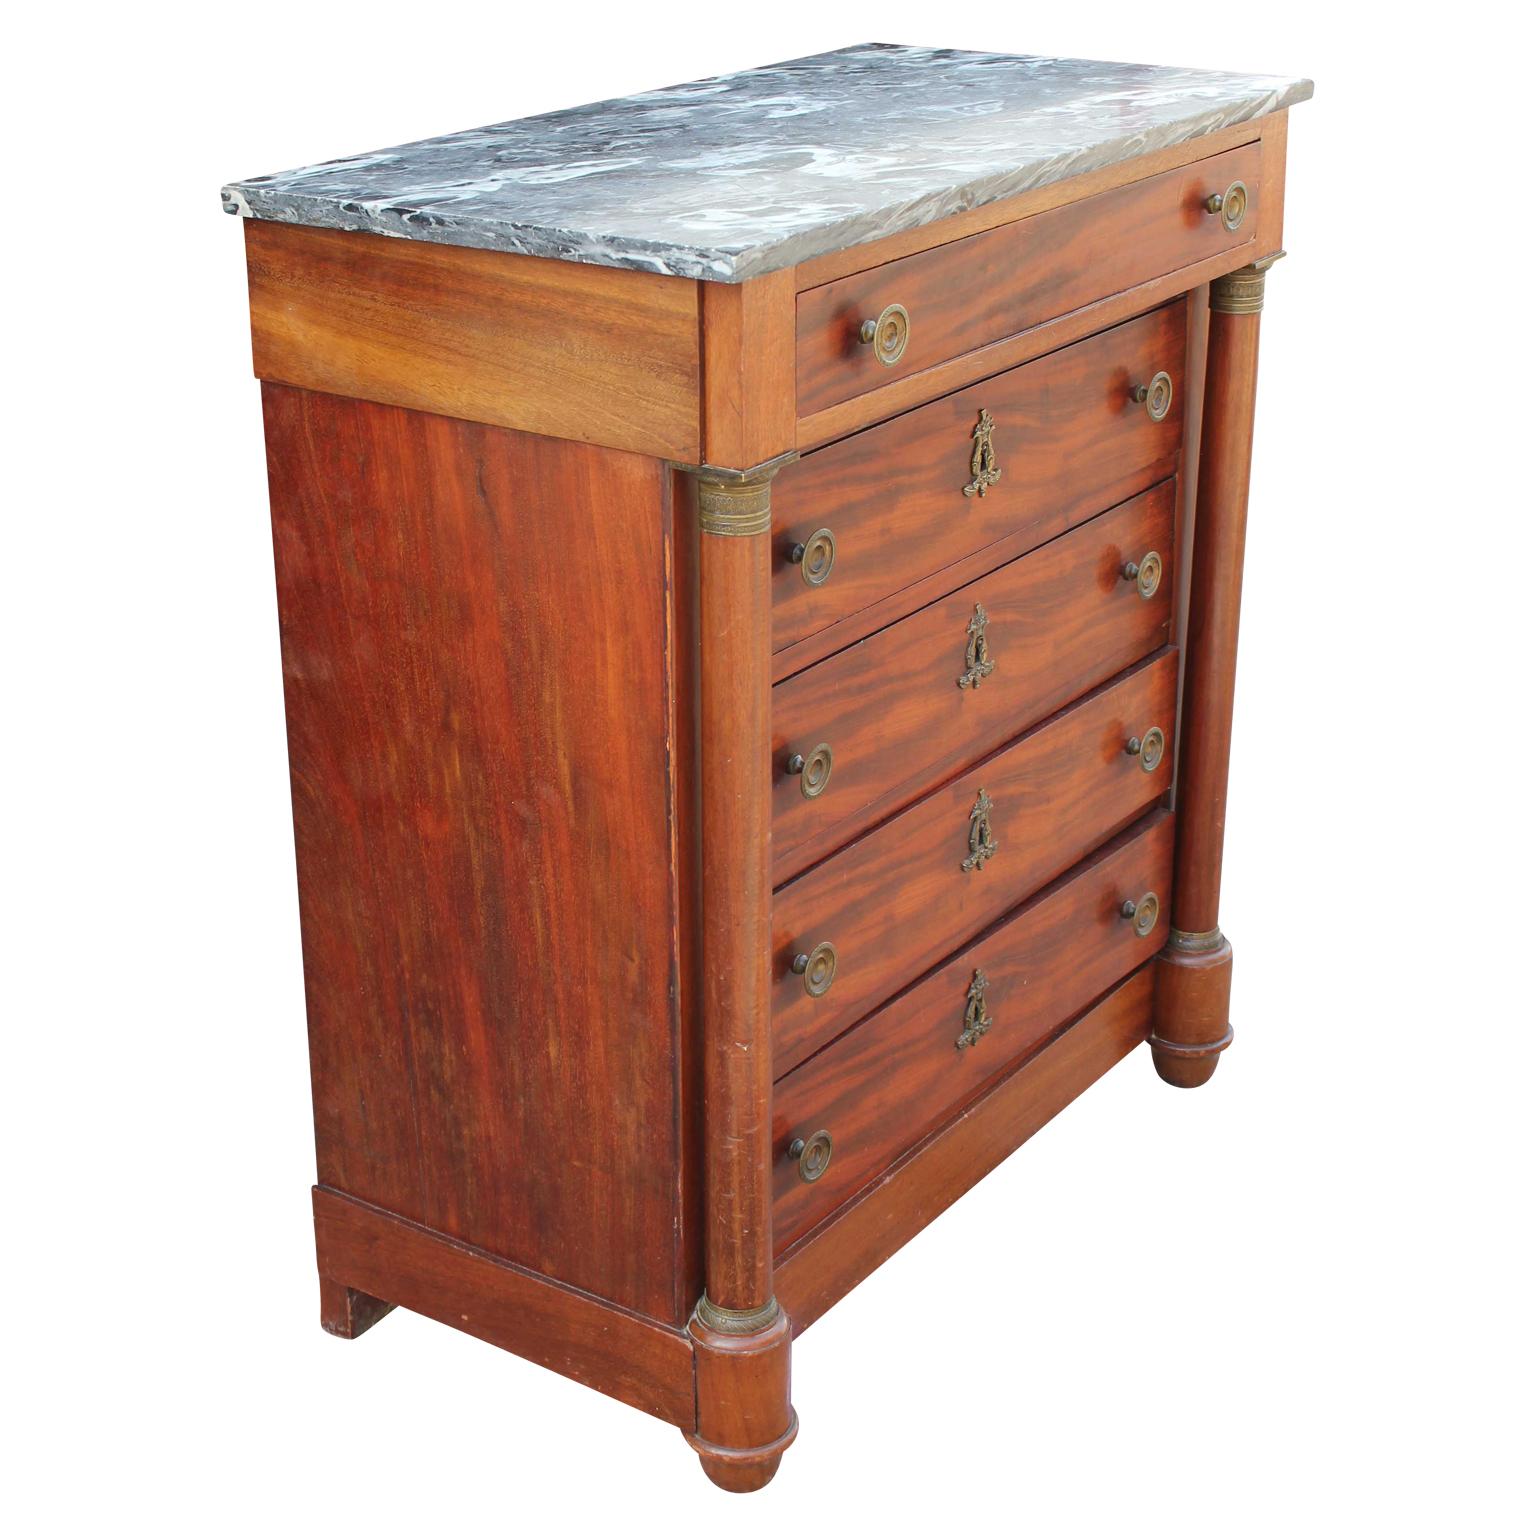 Lovely neoclassical five drawer mahogany chest of drawers / tall dresser with a grey marble top and brass hardware.